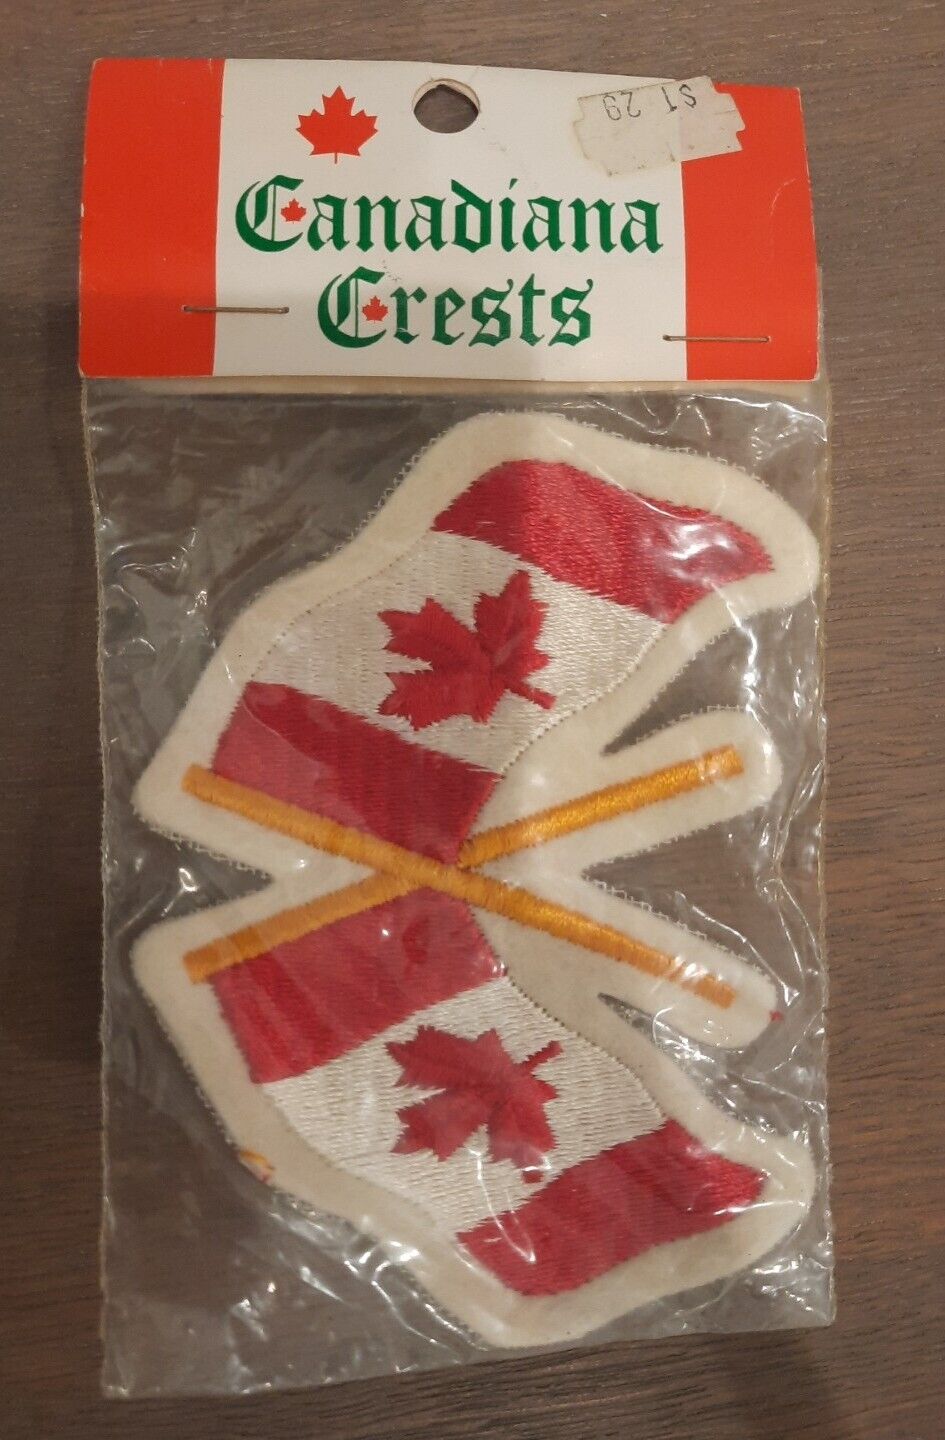 NEW Vintage Canadiana Crests Canadian Flags Patch Metropolitan Supplies Limited